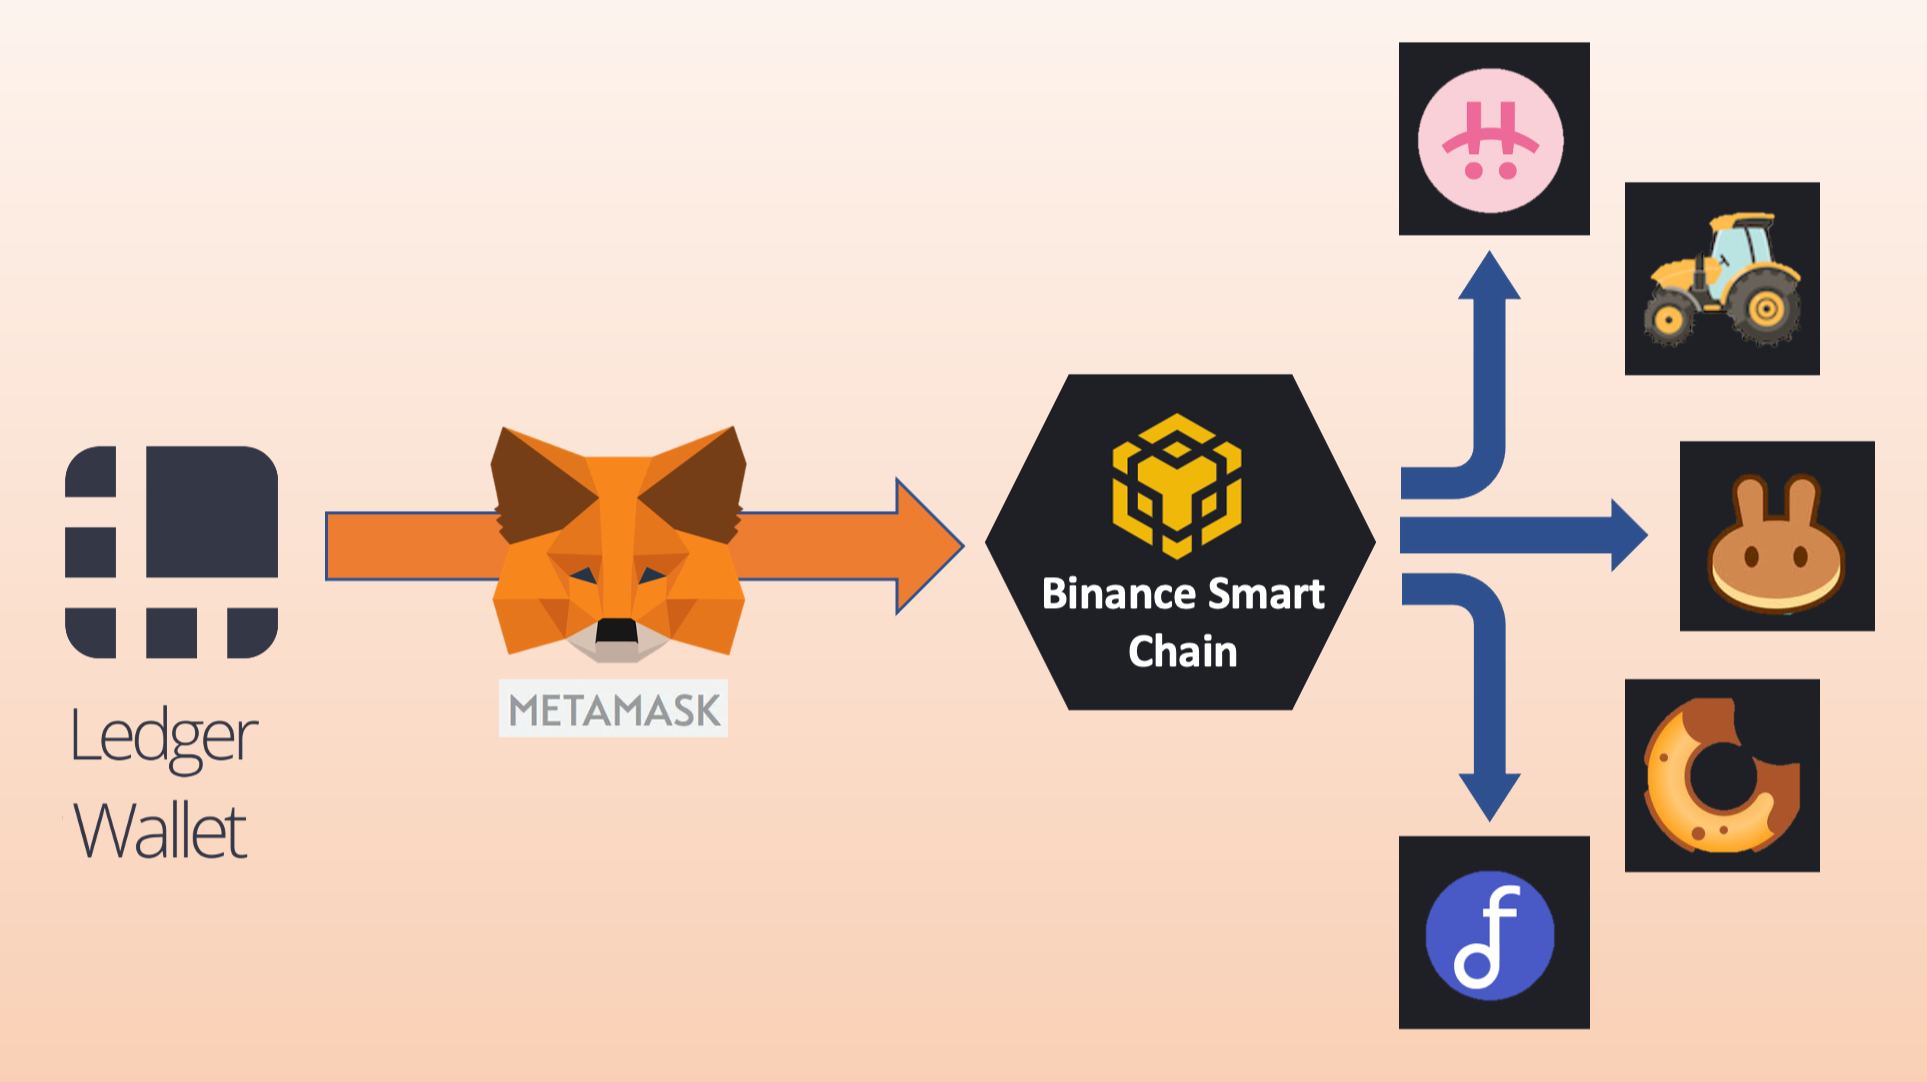 How to Connect Ledger to MetaMask